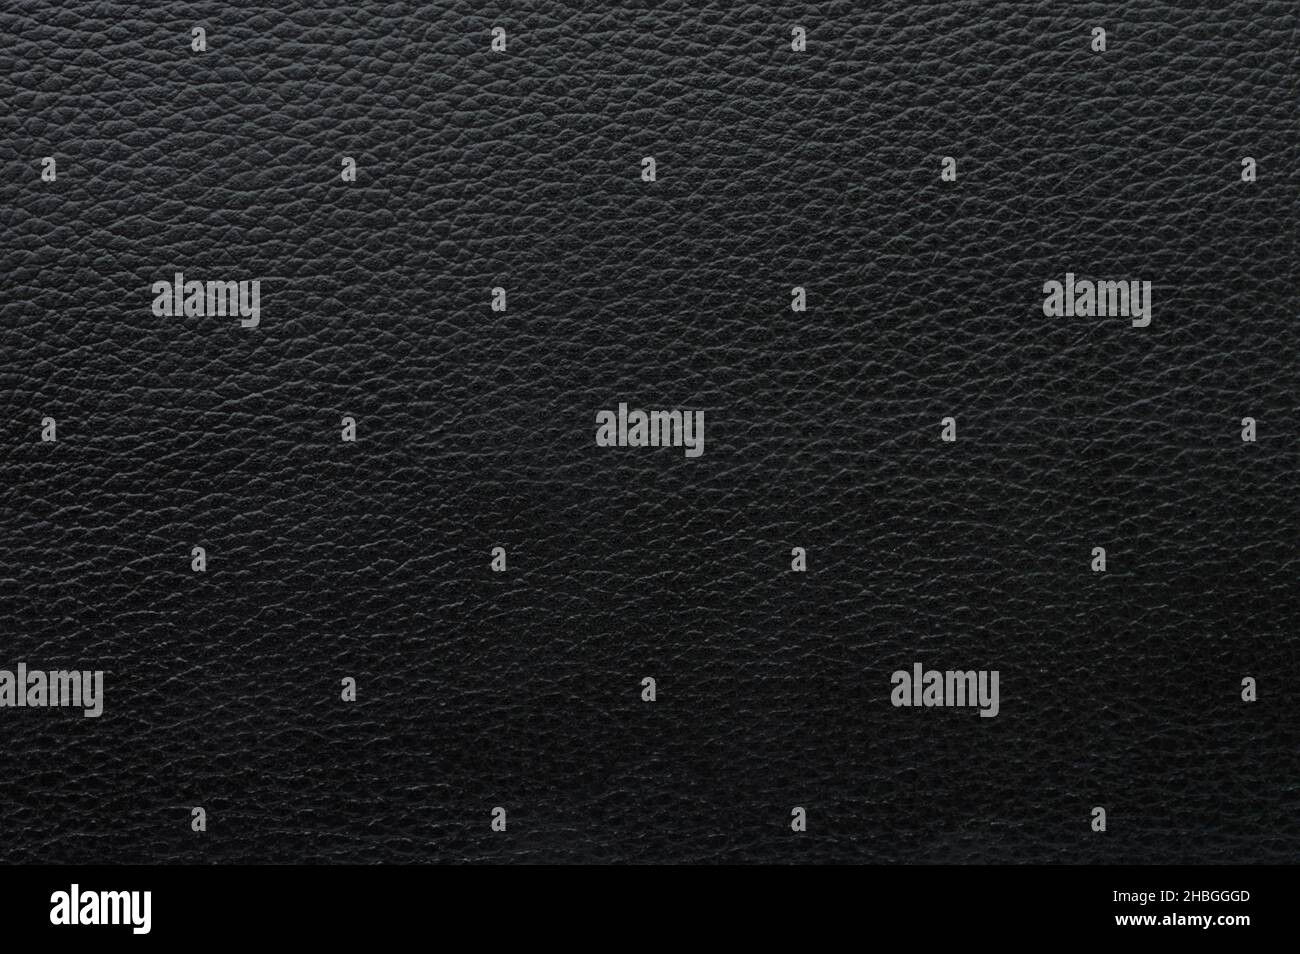 Black leather material surface macro close up view Stock Photo